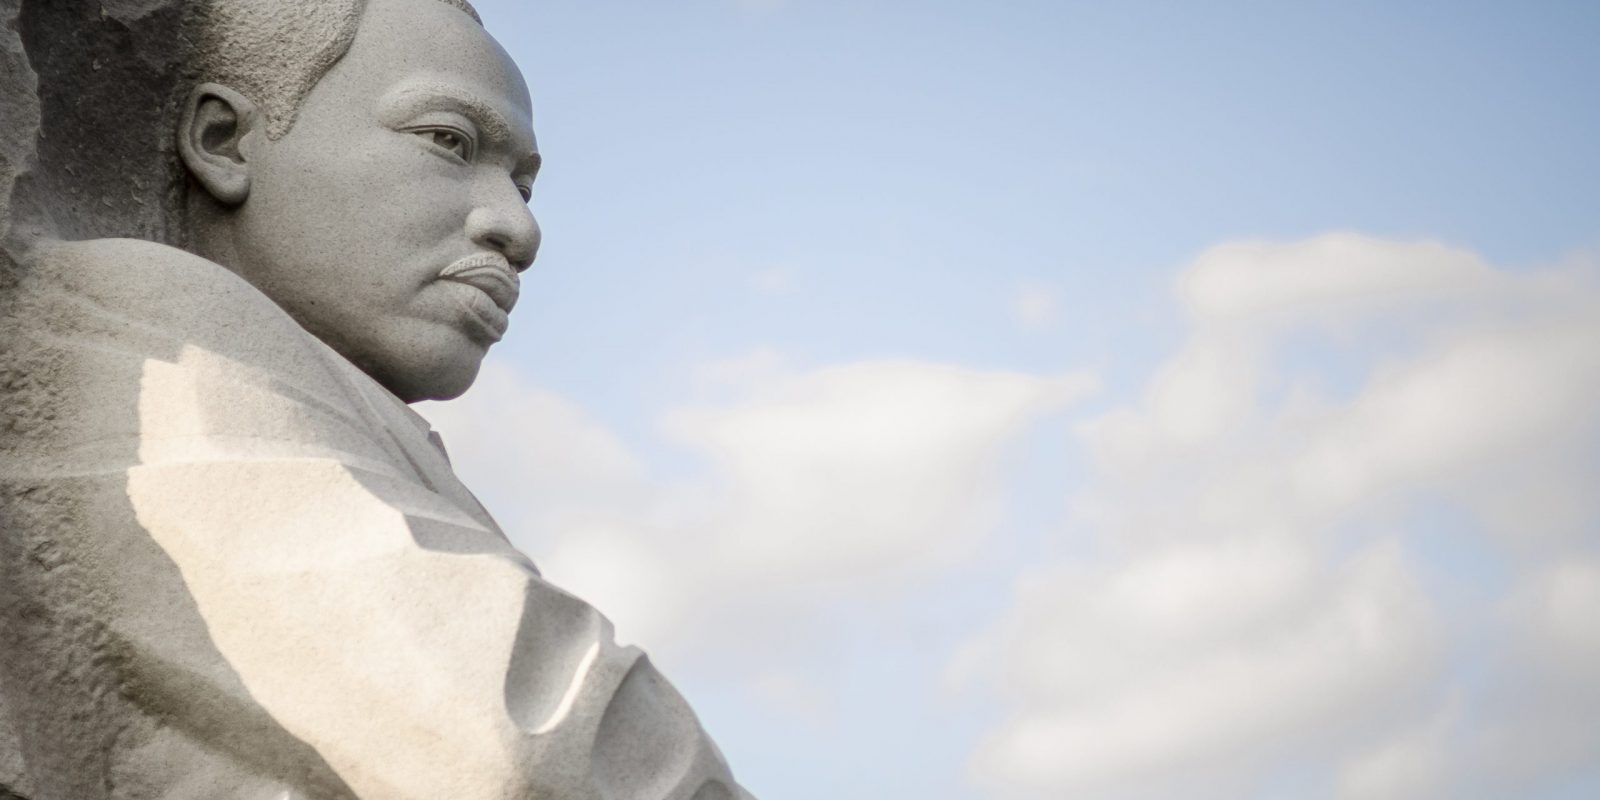 Martin Luther King, Jr. Statue in Washington DC.